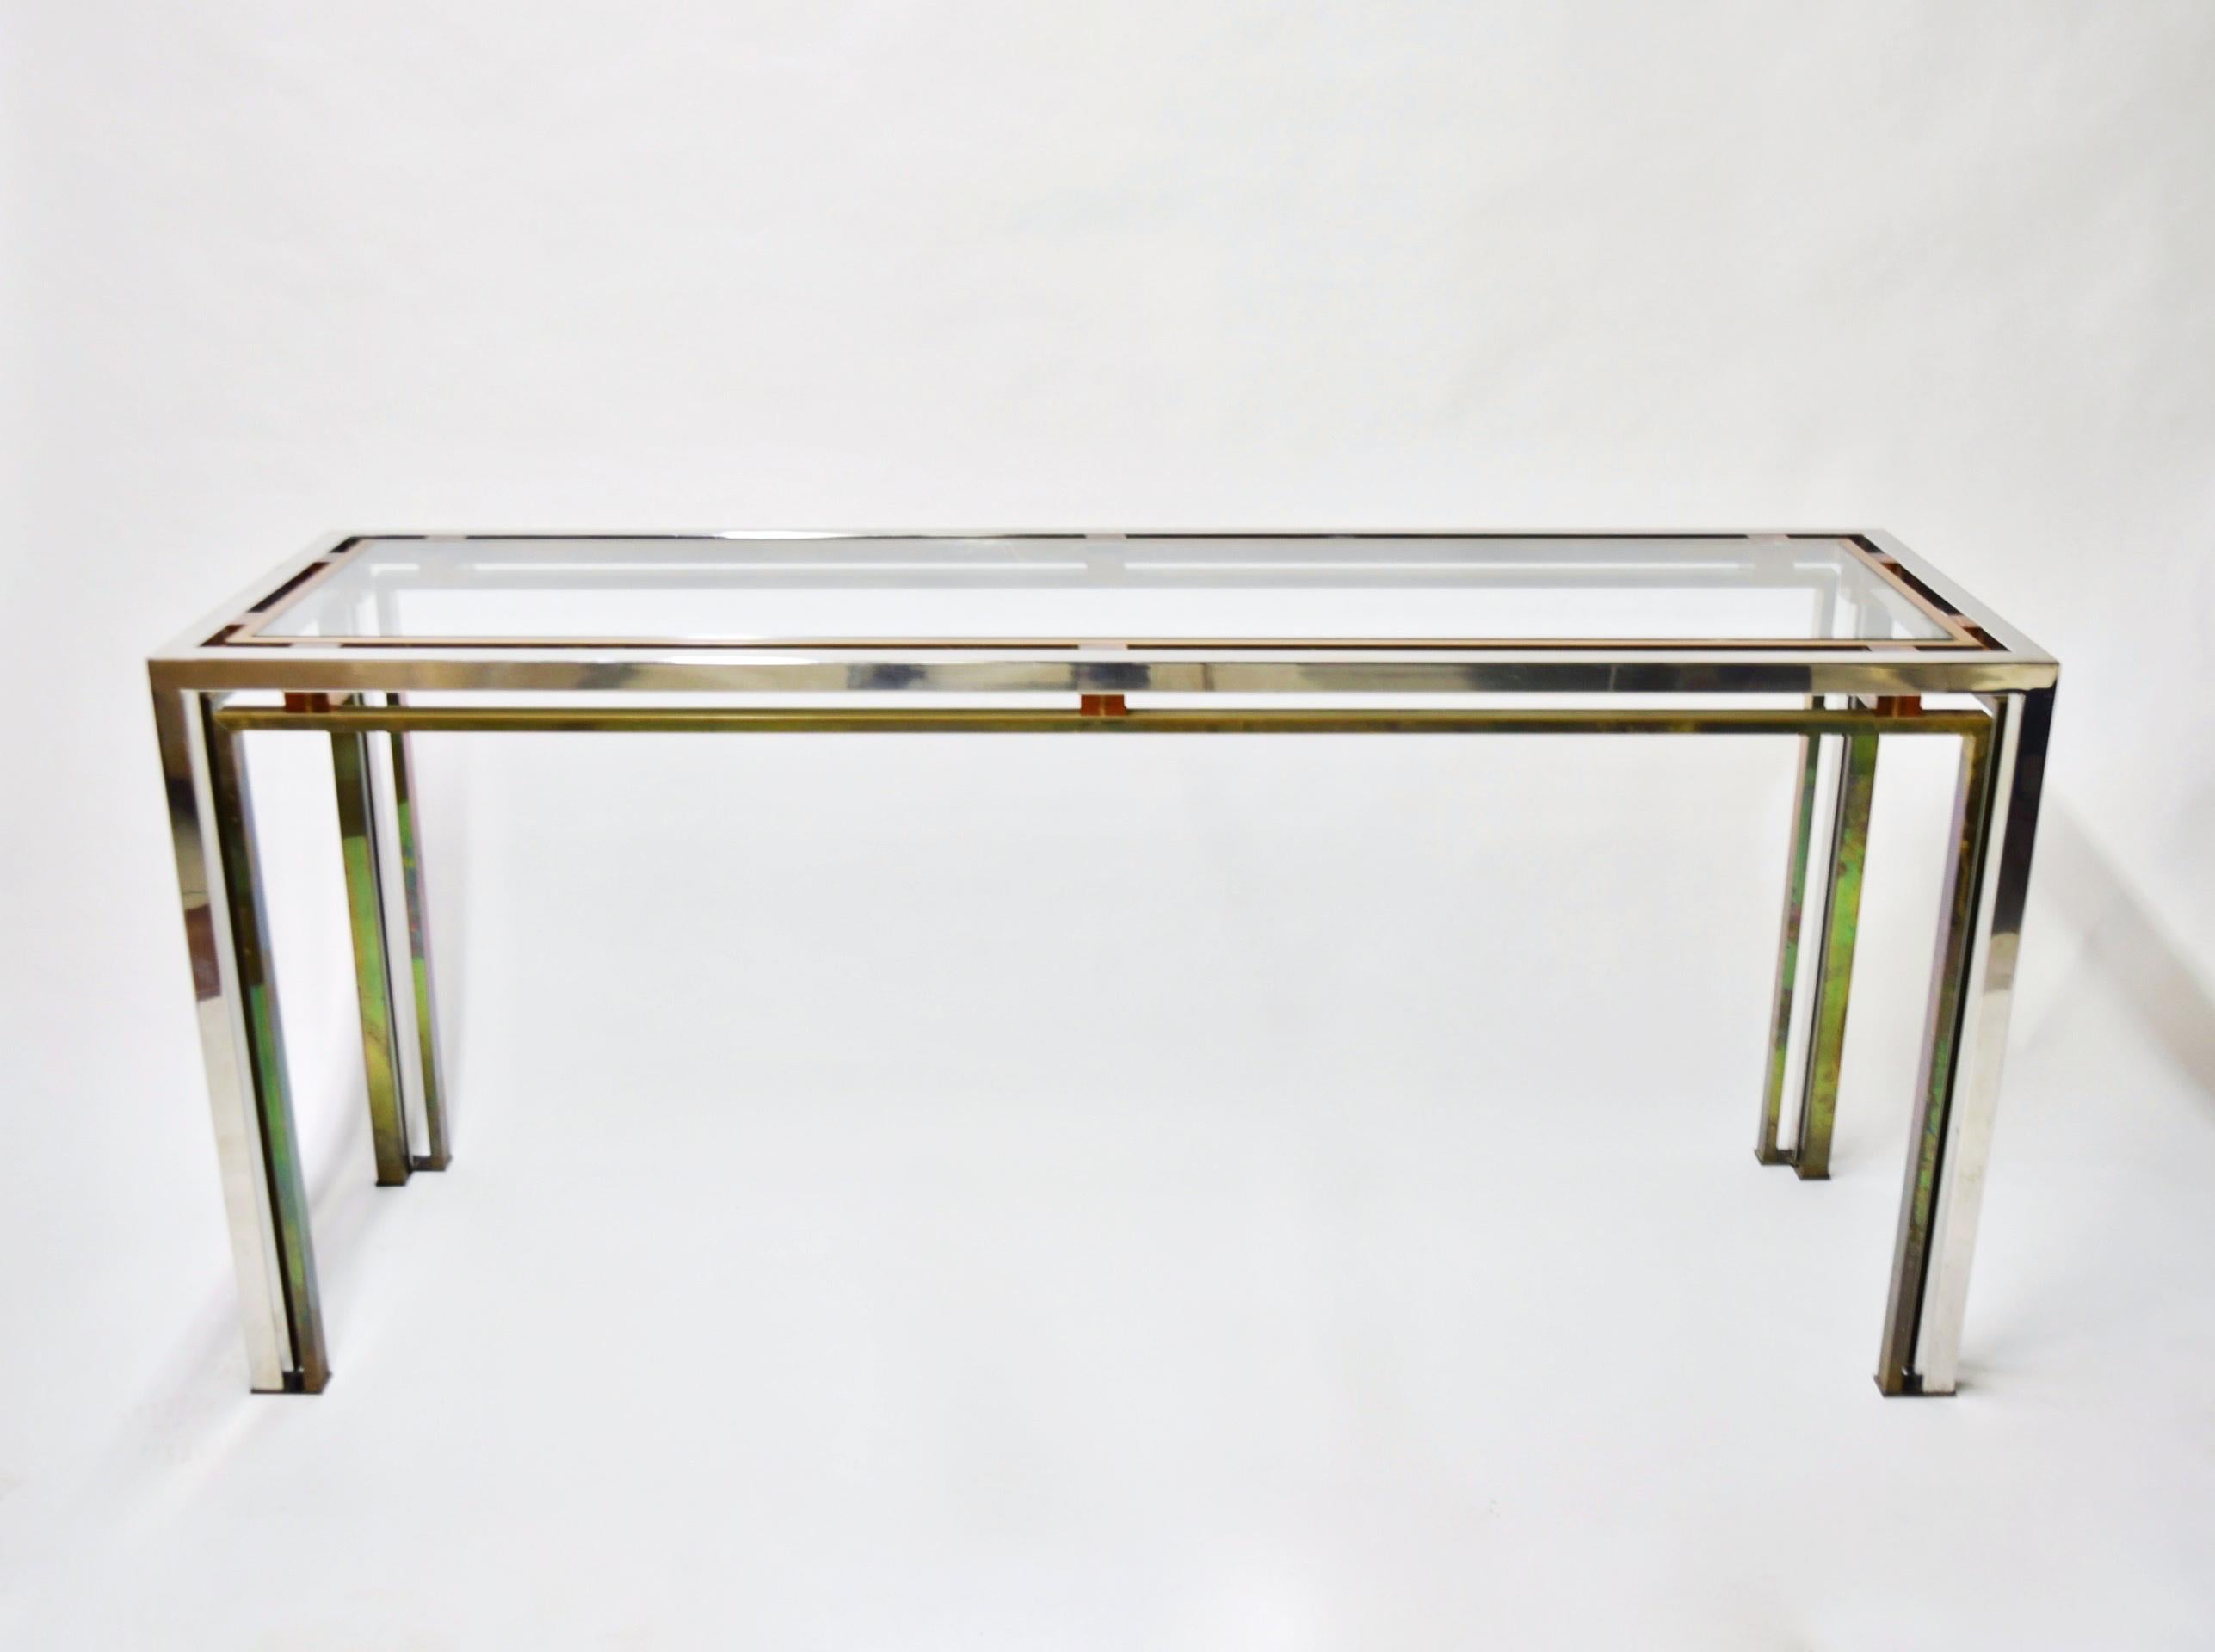 1970s freestanding console table by Romeo Rega in chromed metal, brass with original patina, smoked acrylic details along the top edges and an inset clear glass top.